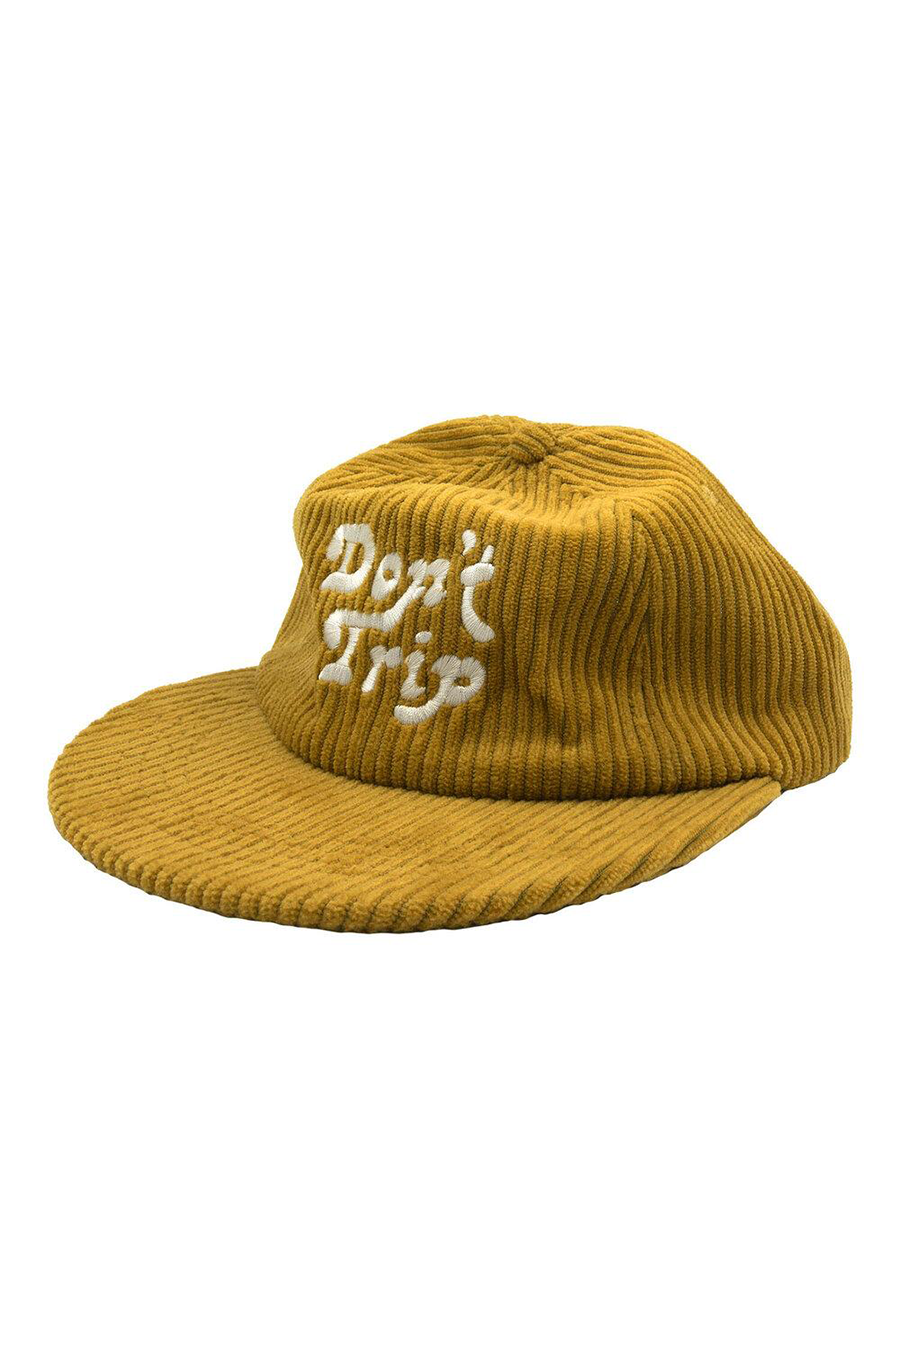 Don't Trip Fat Corduroy Hat | Mustard - Main Image Number 1 of 2